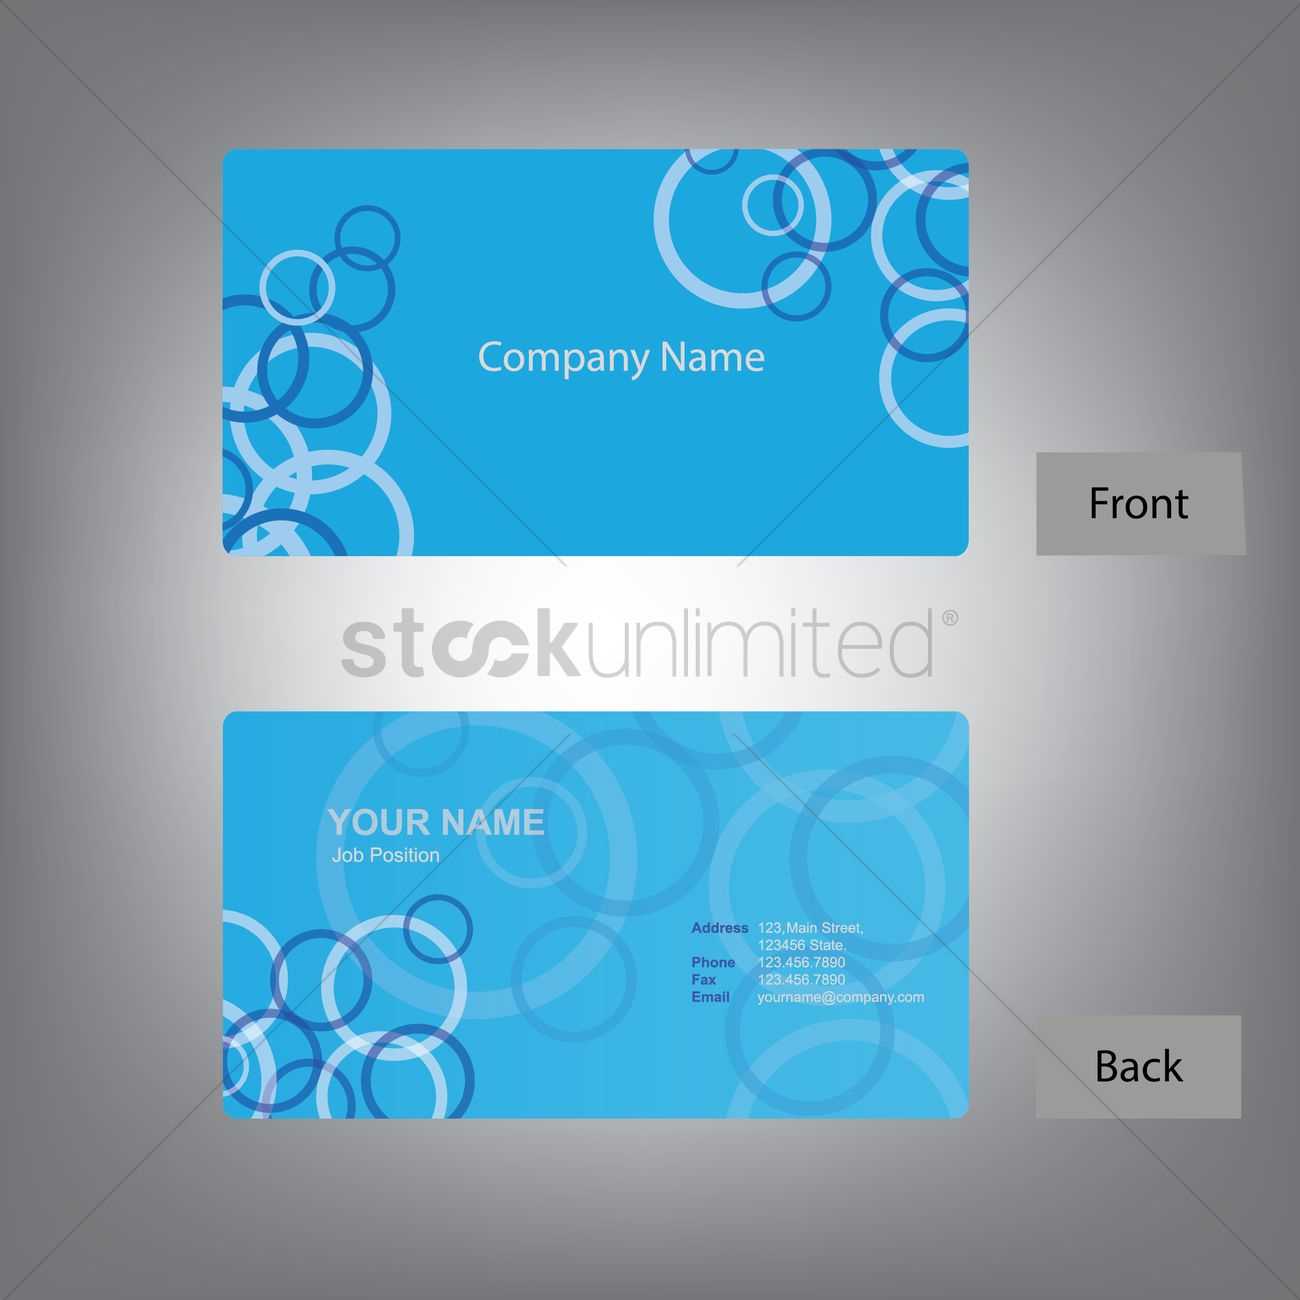 Front And Back Business Card Template Word ] - Card Template Regarding Front And Back Business Card Template Word